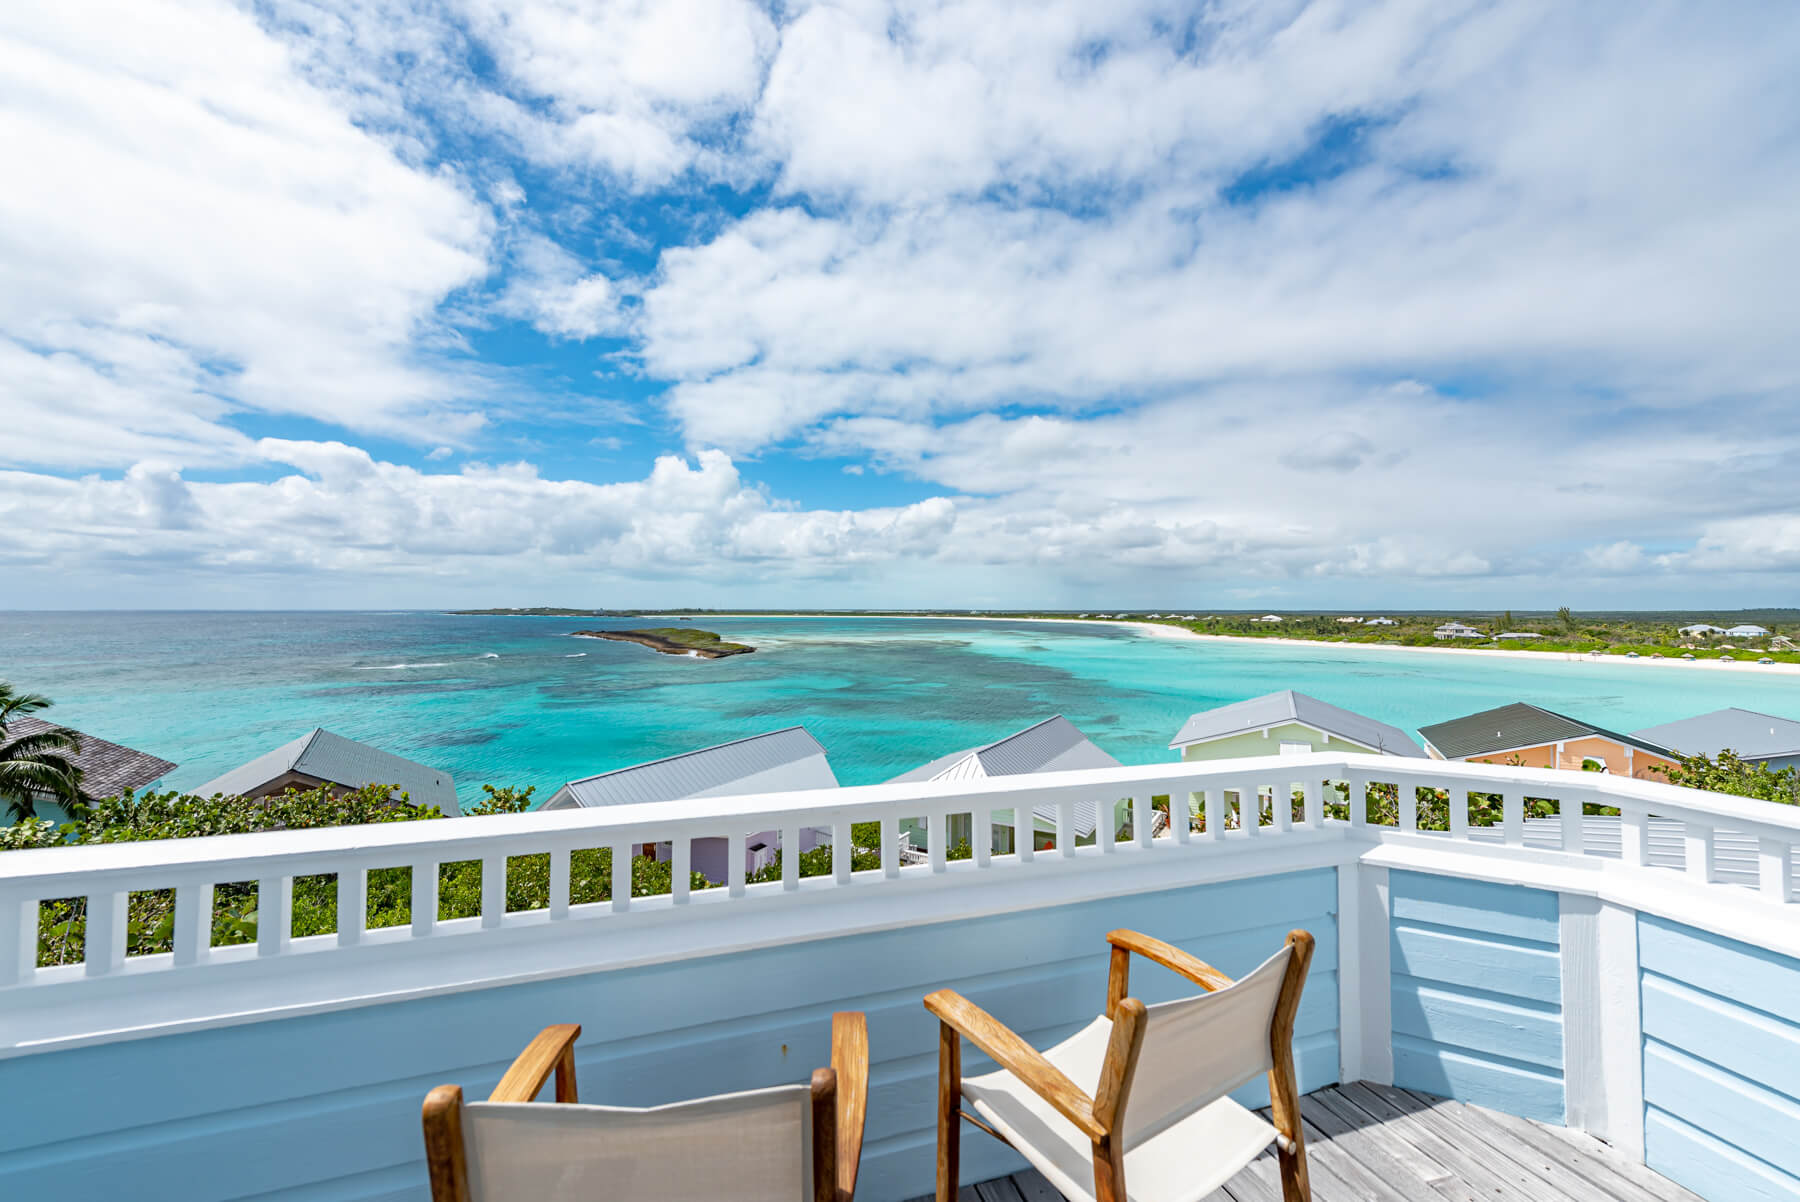 Balcony of a house located close to the Cliff House restaurant in The Bahamas